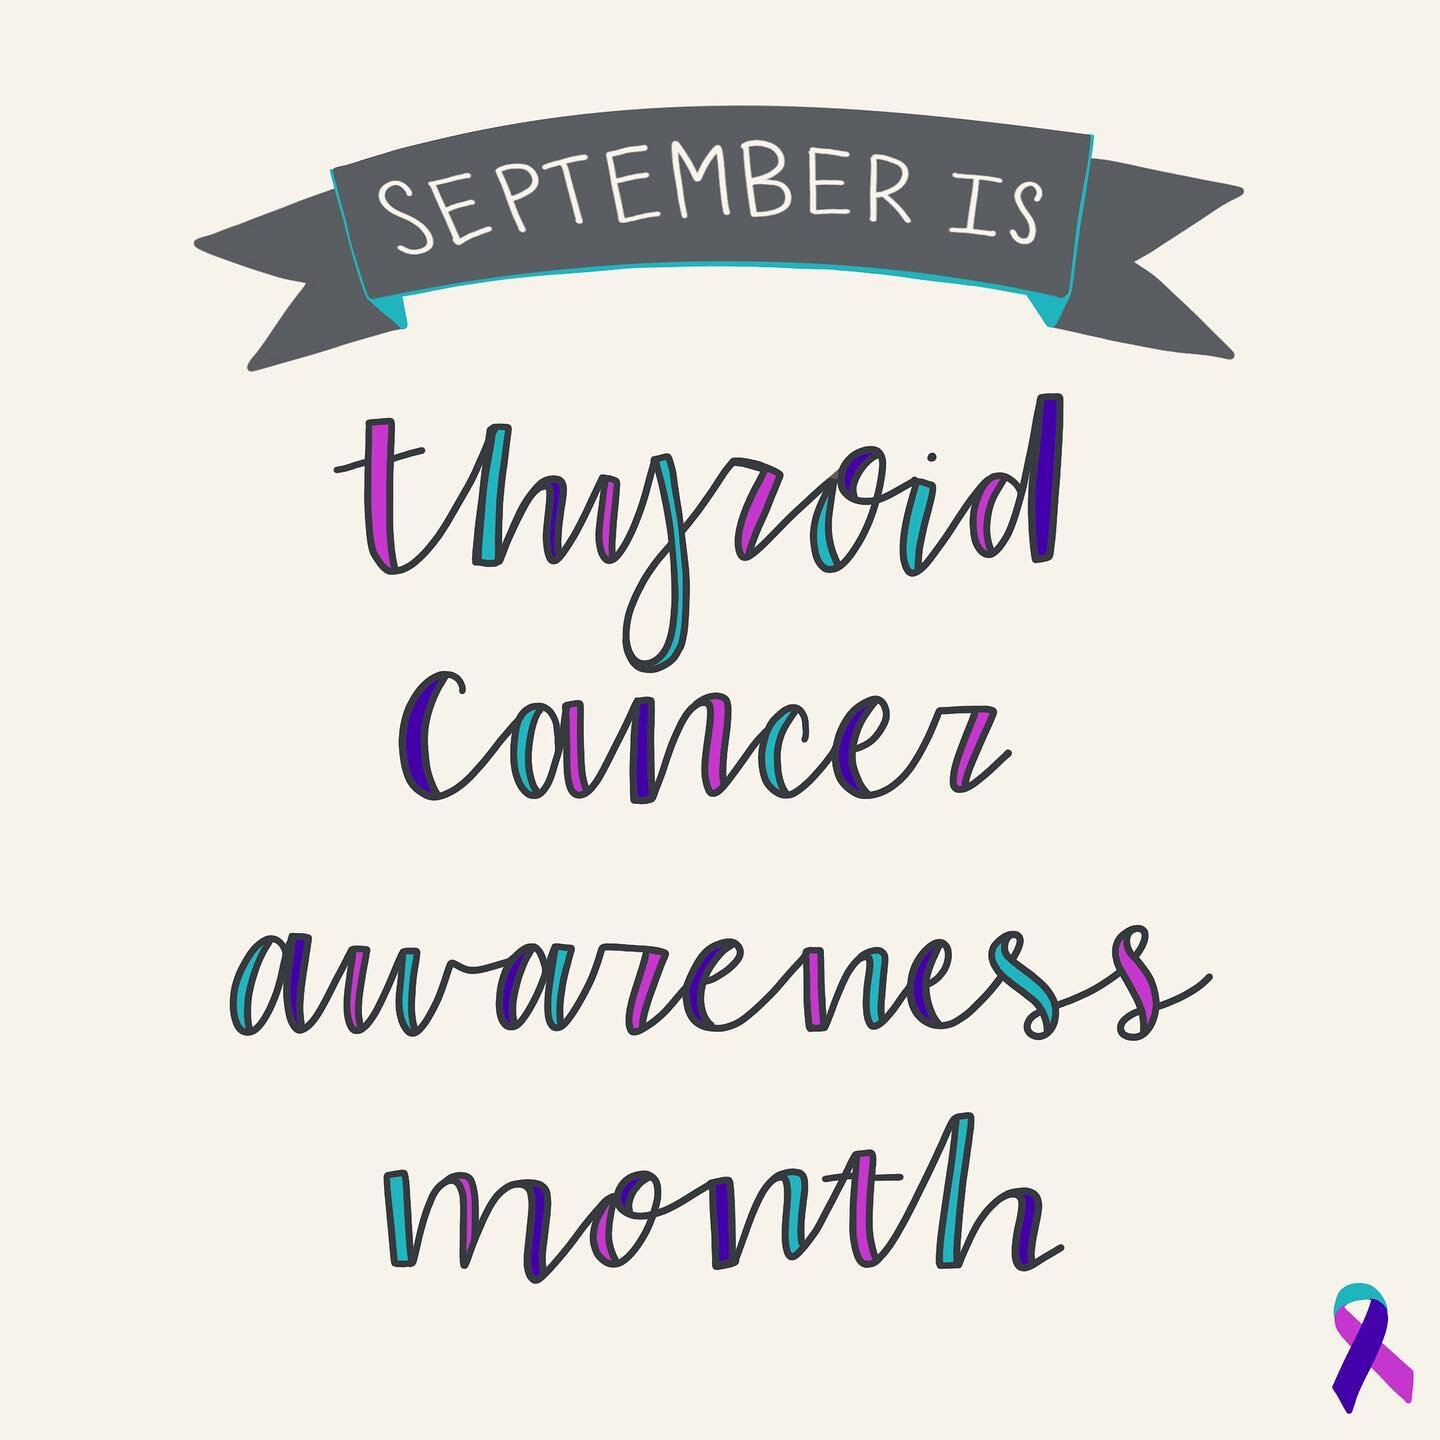 Thyroid cancer is the most common endocrine cancer and incidence rates have been increasing, especially in women. It is the MOST COMMON cancer in women 15-29 and second most common in women 30-39.

In 2018, I had a lump in my throat. A 4cm tumor on t